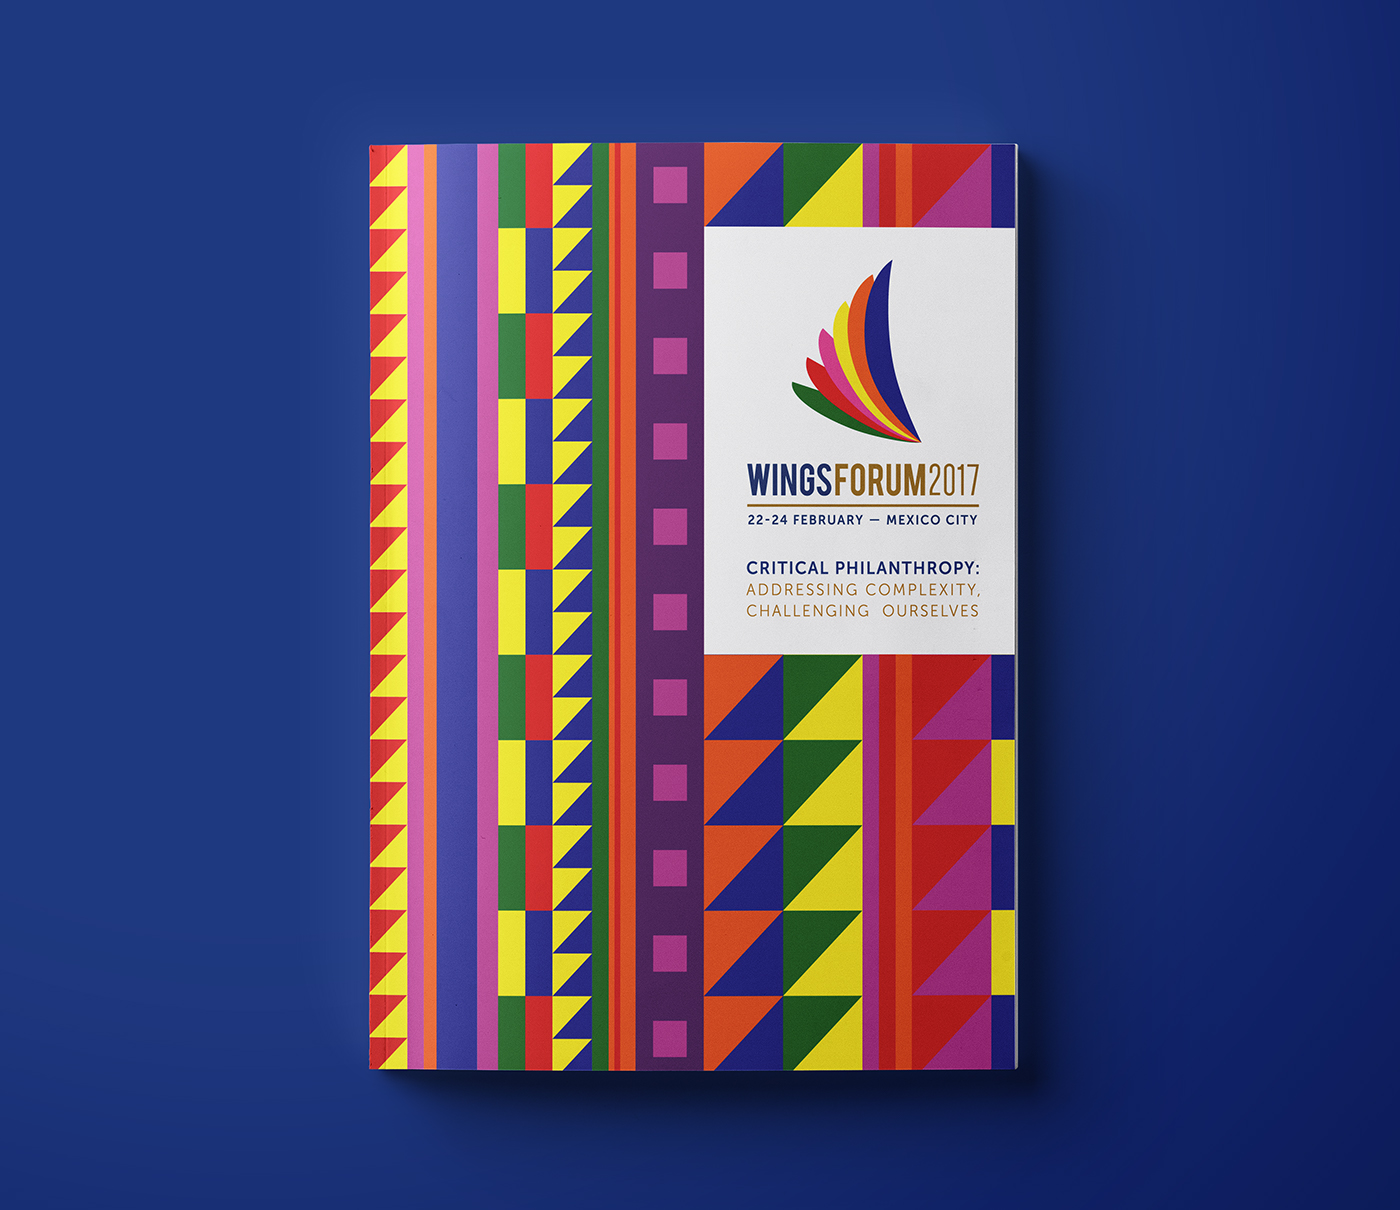 Program programme report festival conference branding  mexico Mexican pattern print